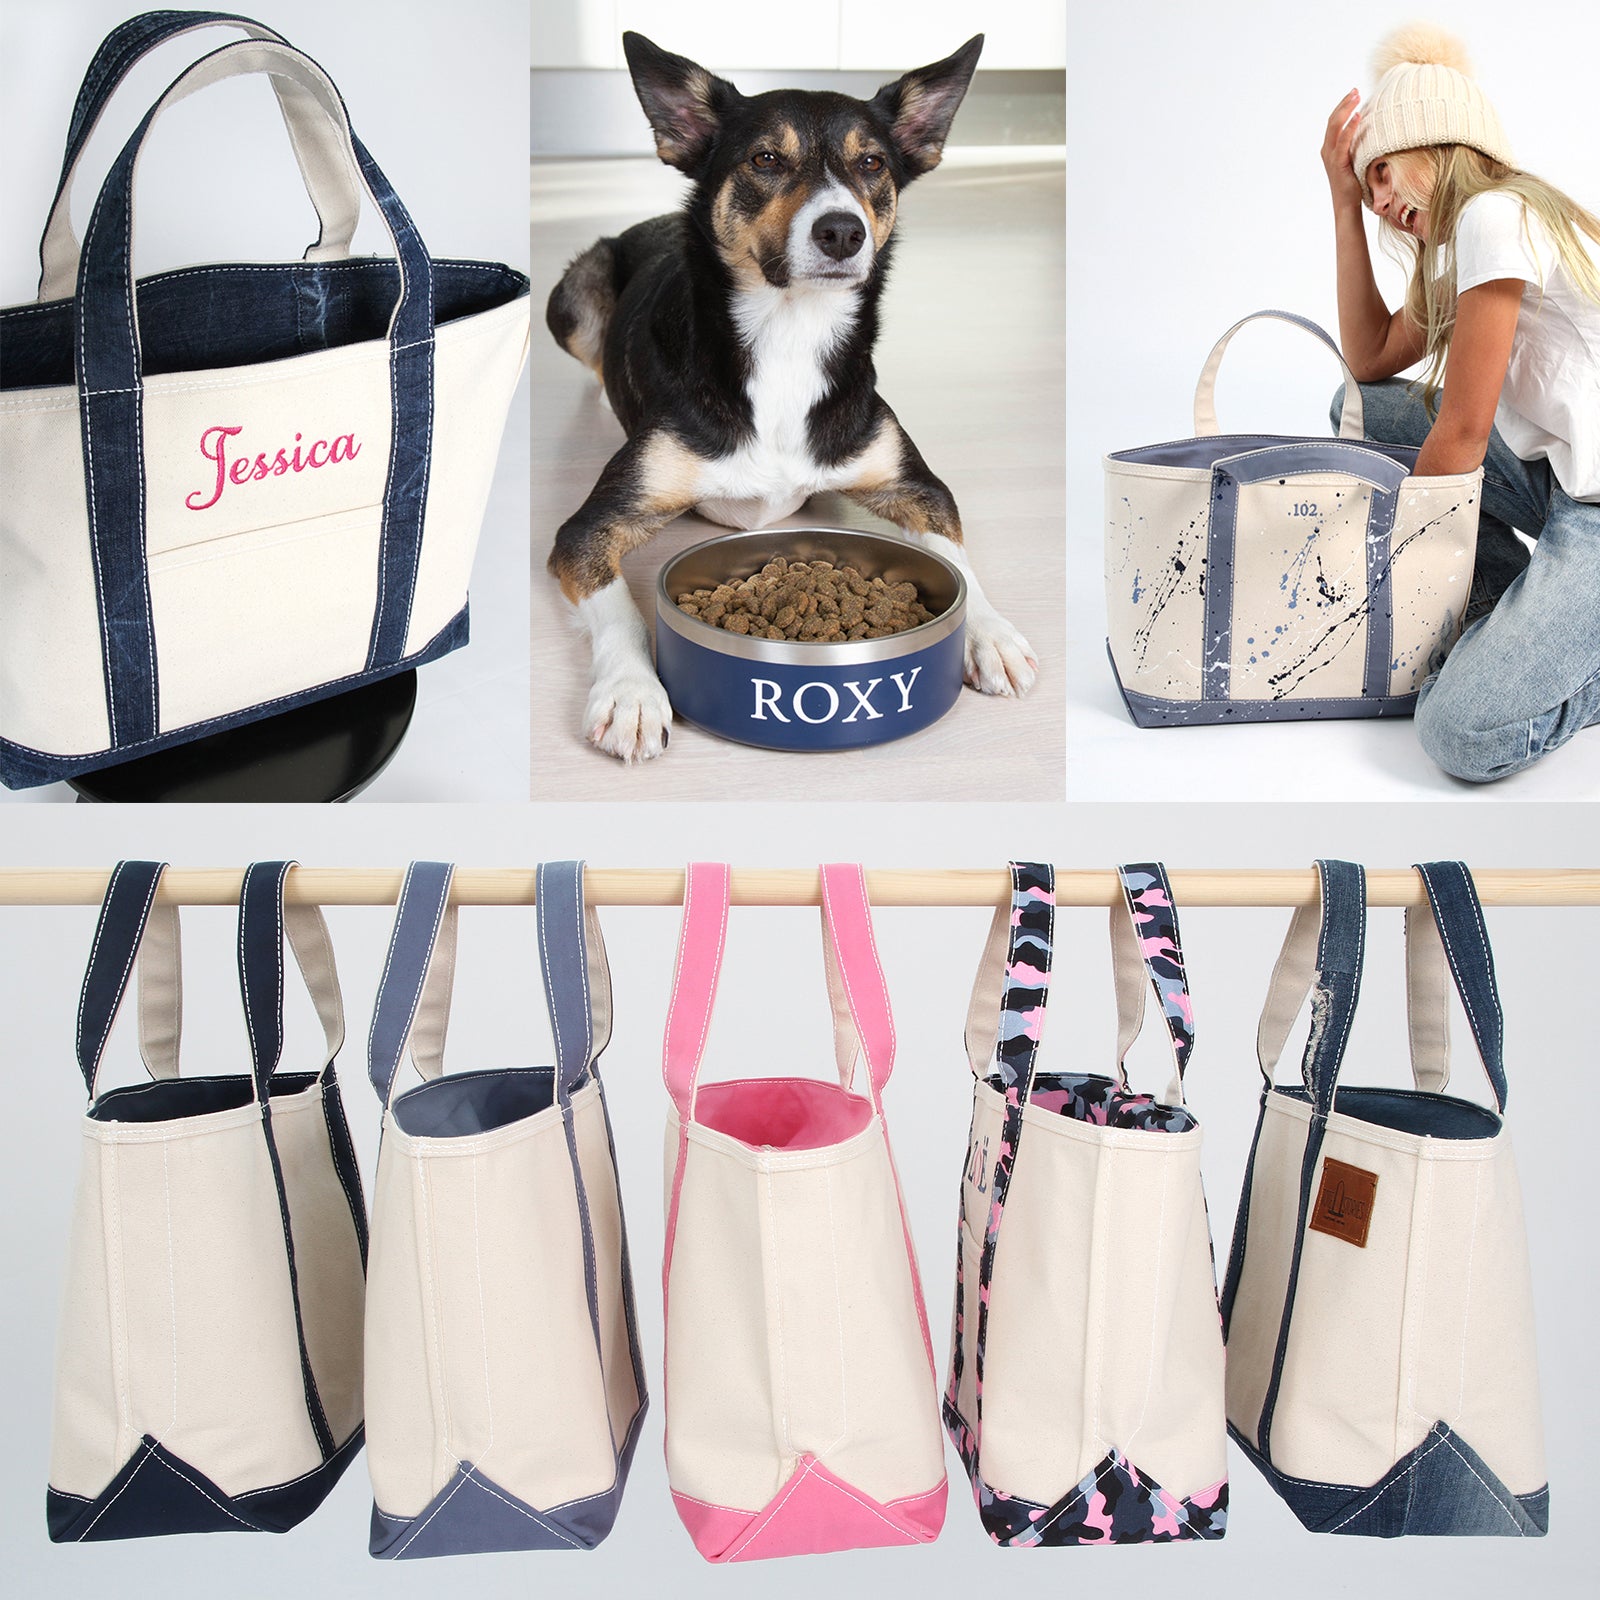 TOTE STORIES l Luxury personalized gifts - Tote bags, coolers, towels